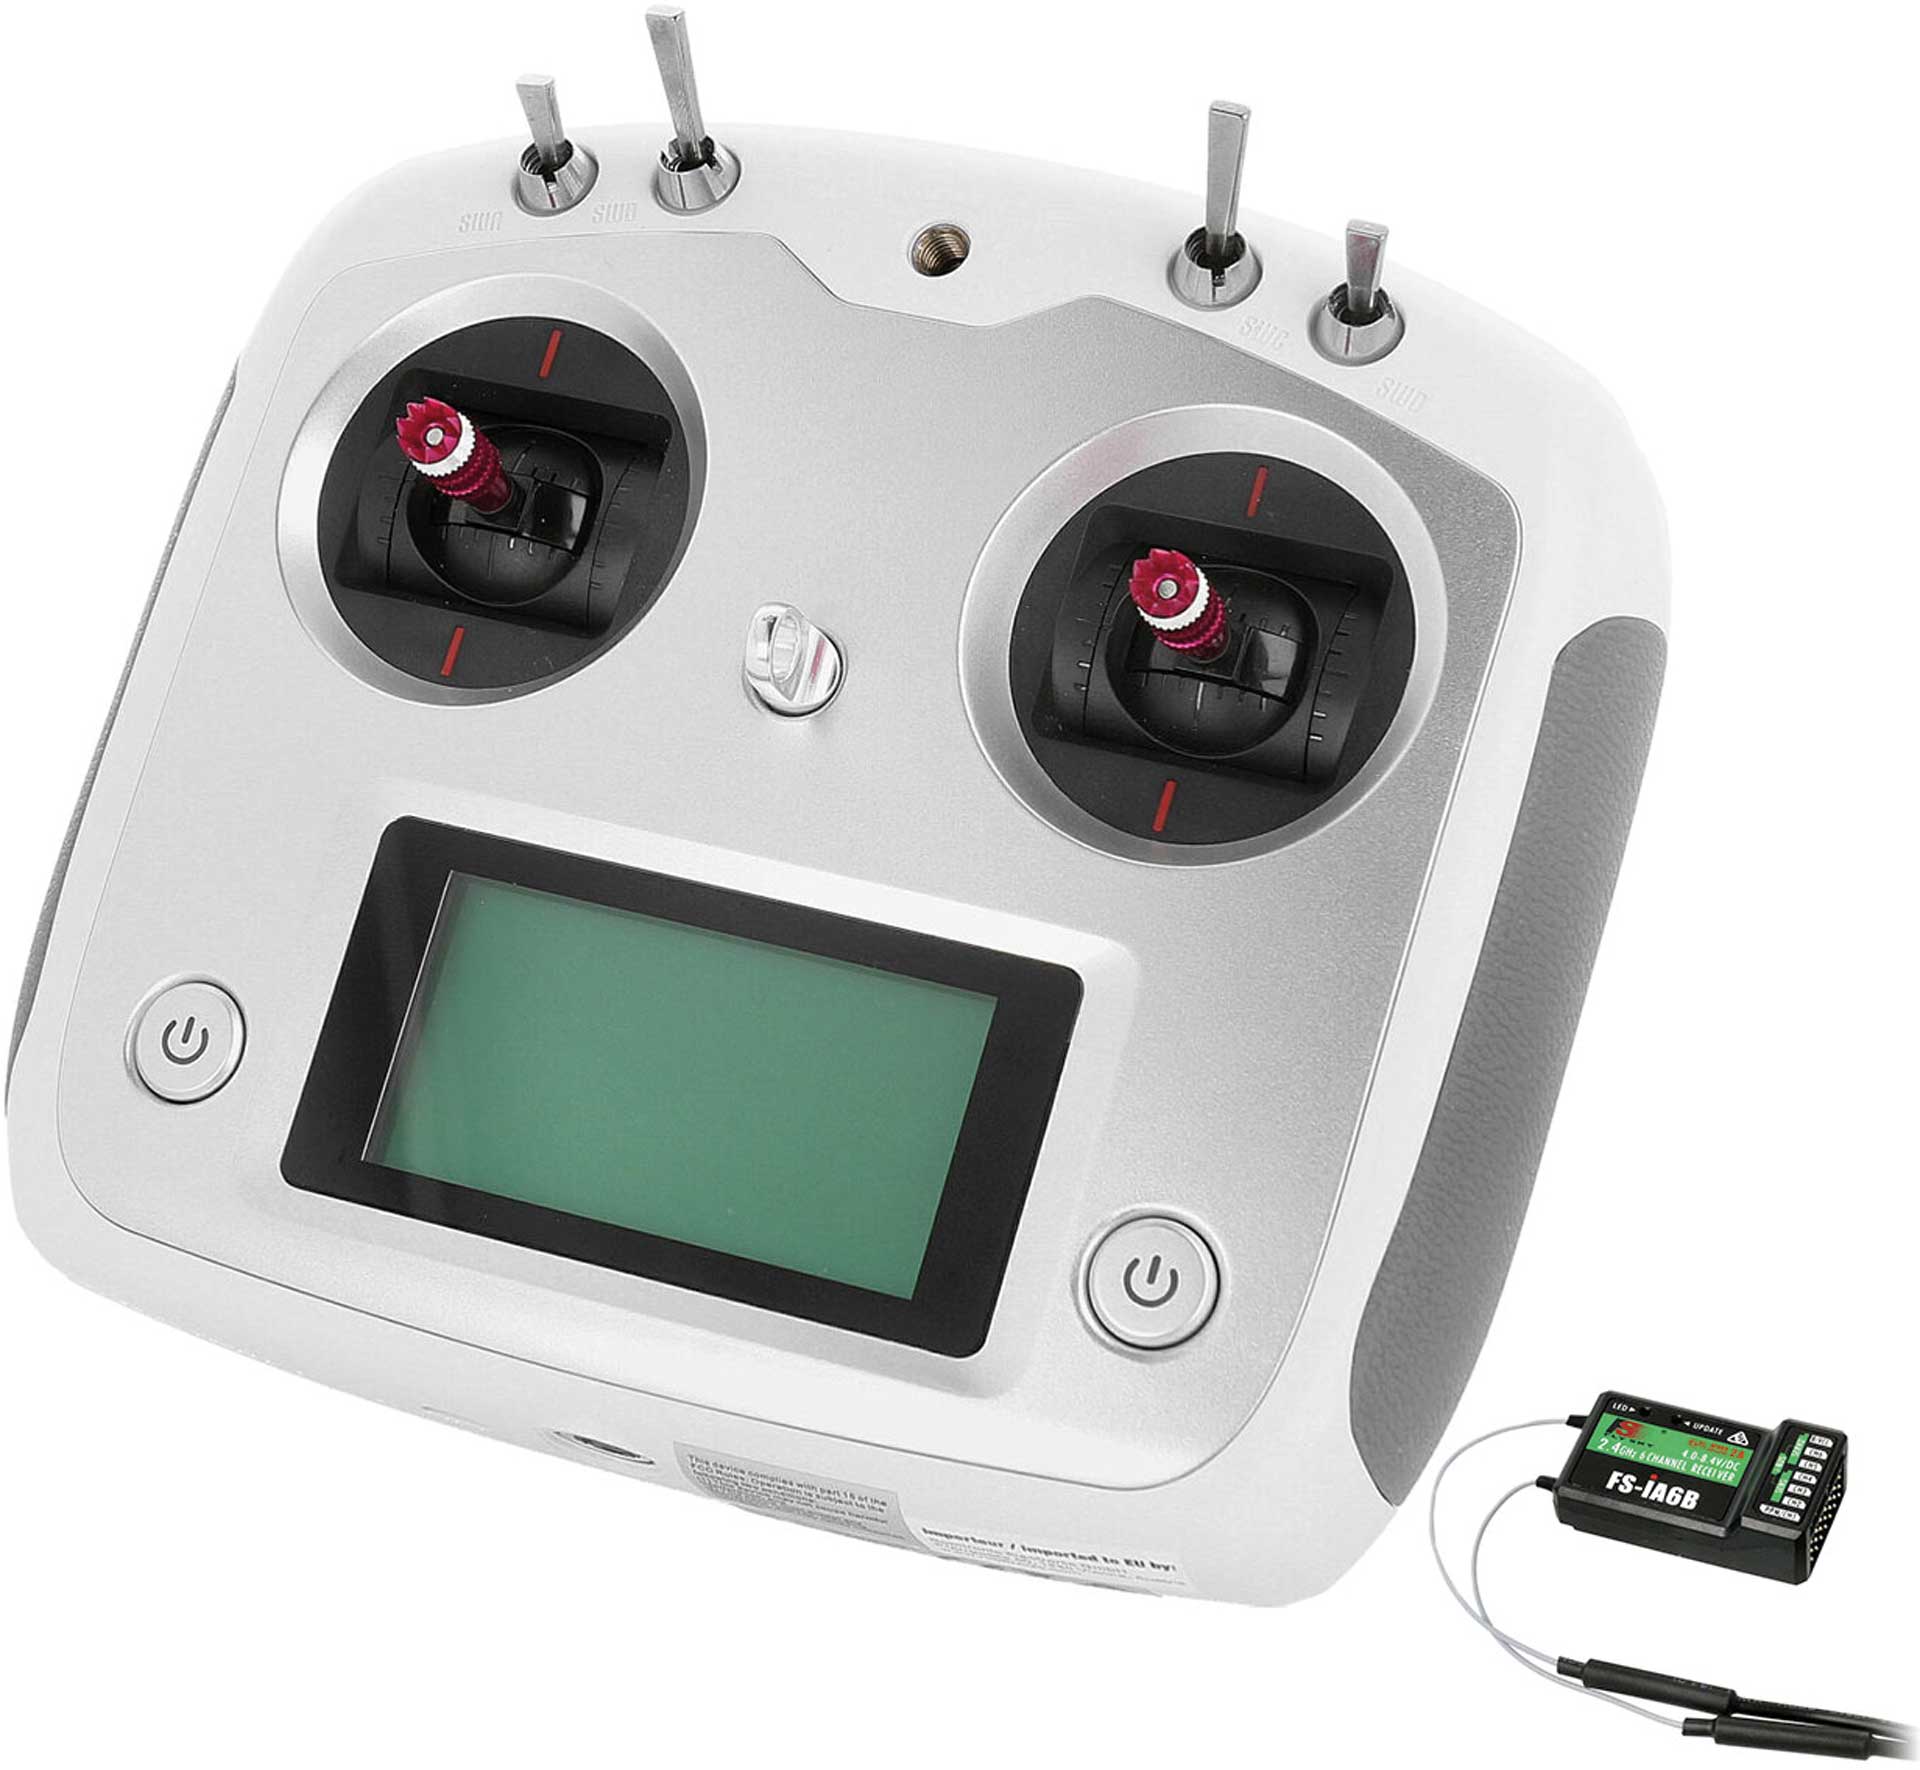 Flysky i6S transmitter with 6 channel receiver